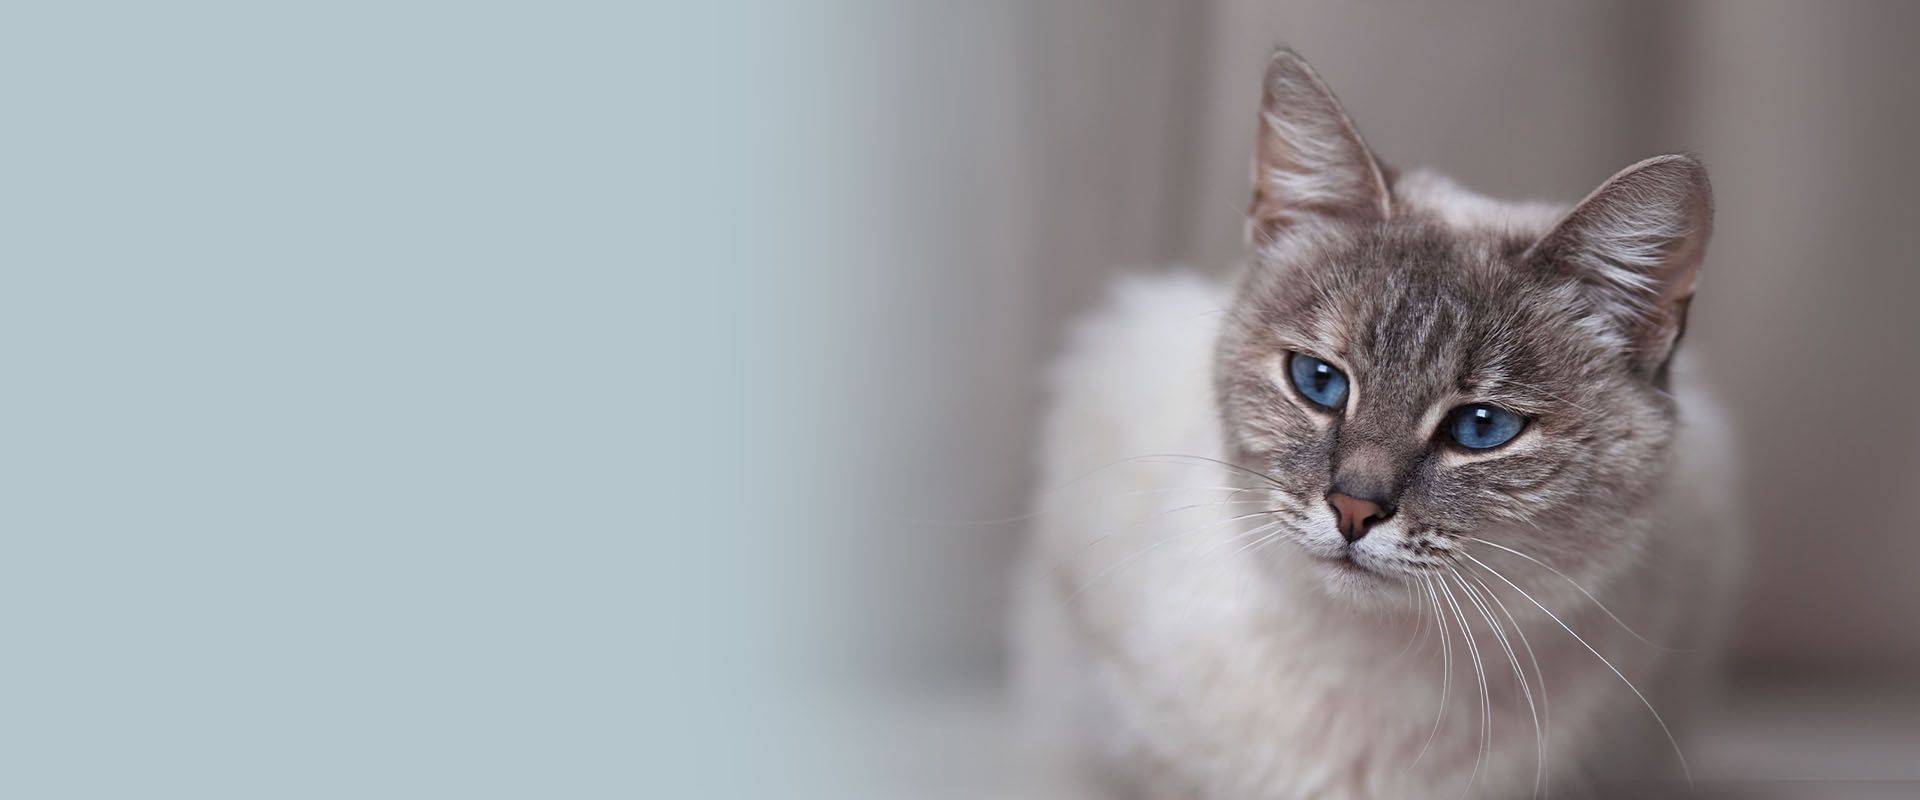 Siamese cat with a blurry gray background